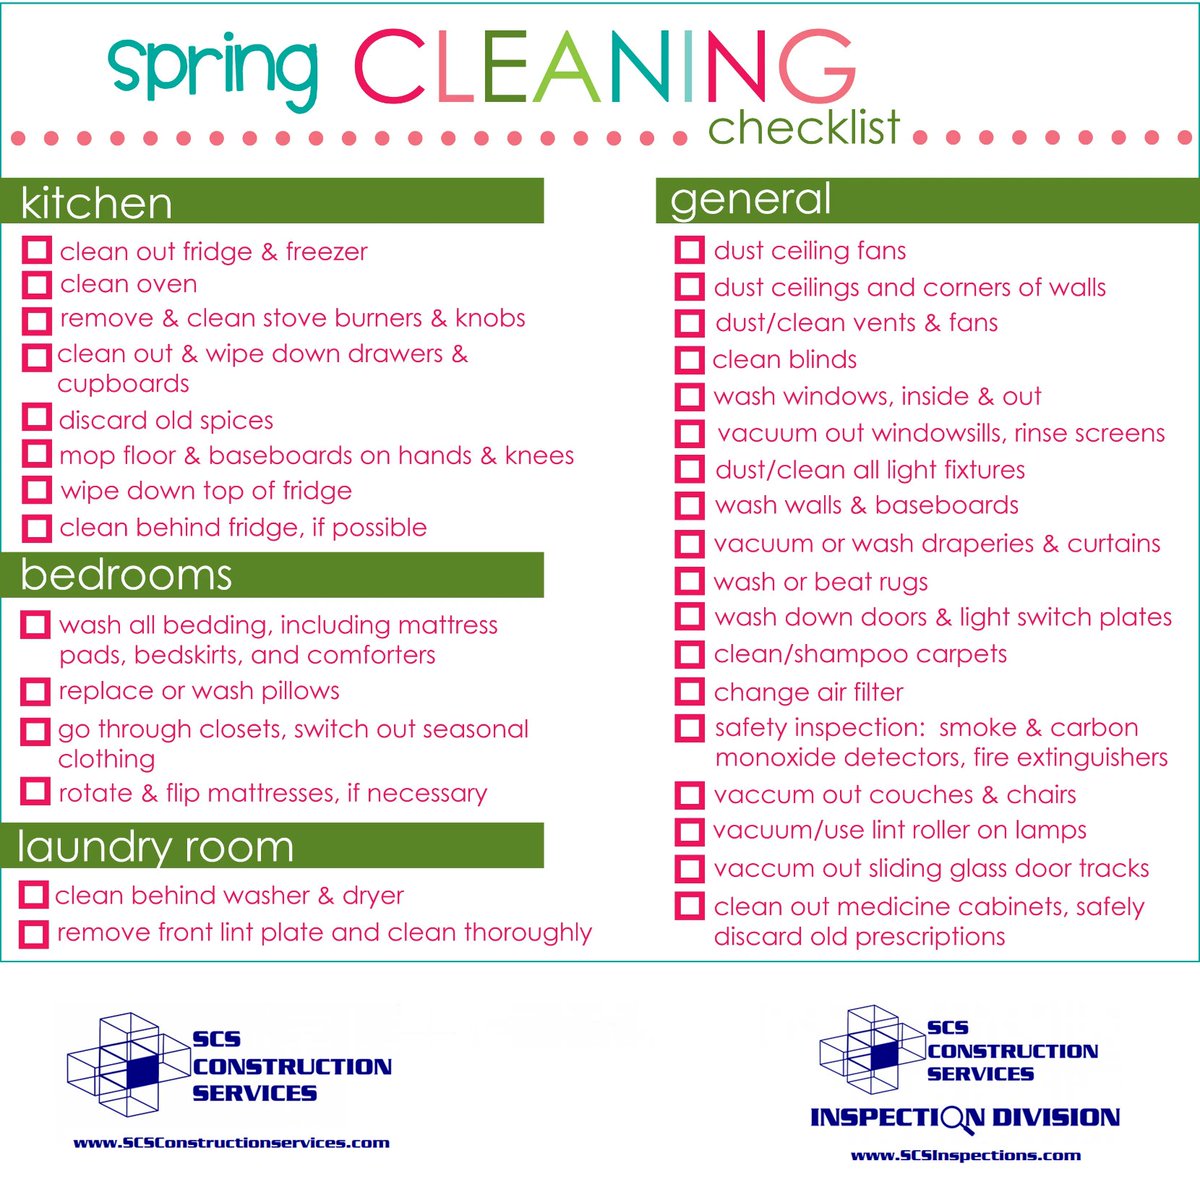 #SpringCleaning Checklist for #TipTuesday from @scsconstruction